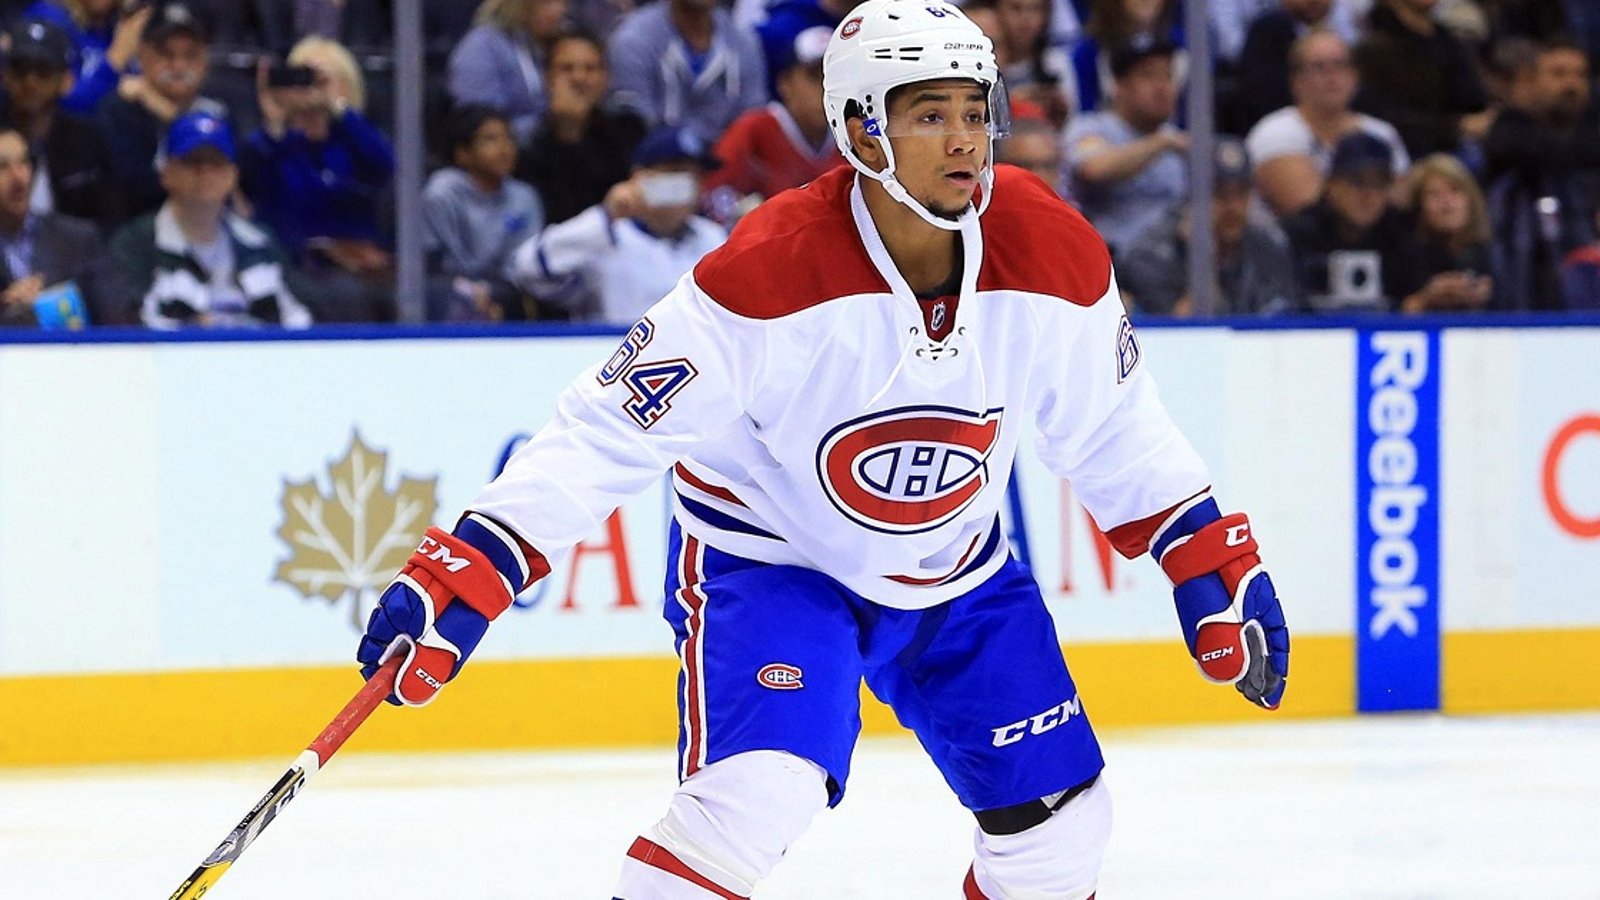 Breaking: Habs place forward on unconditional waivers, may be the end of the road.